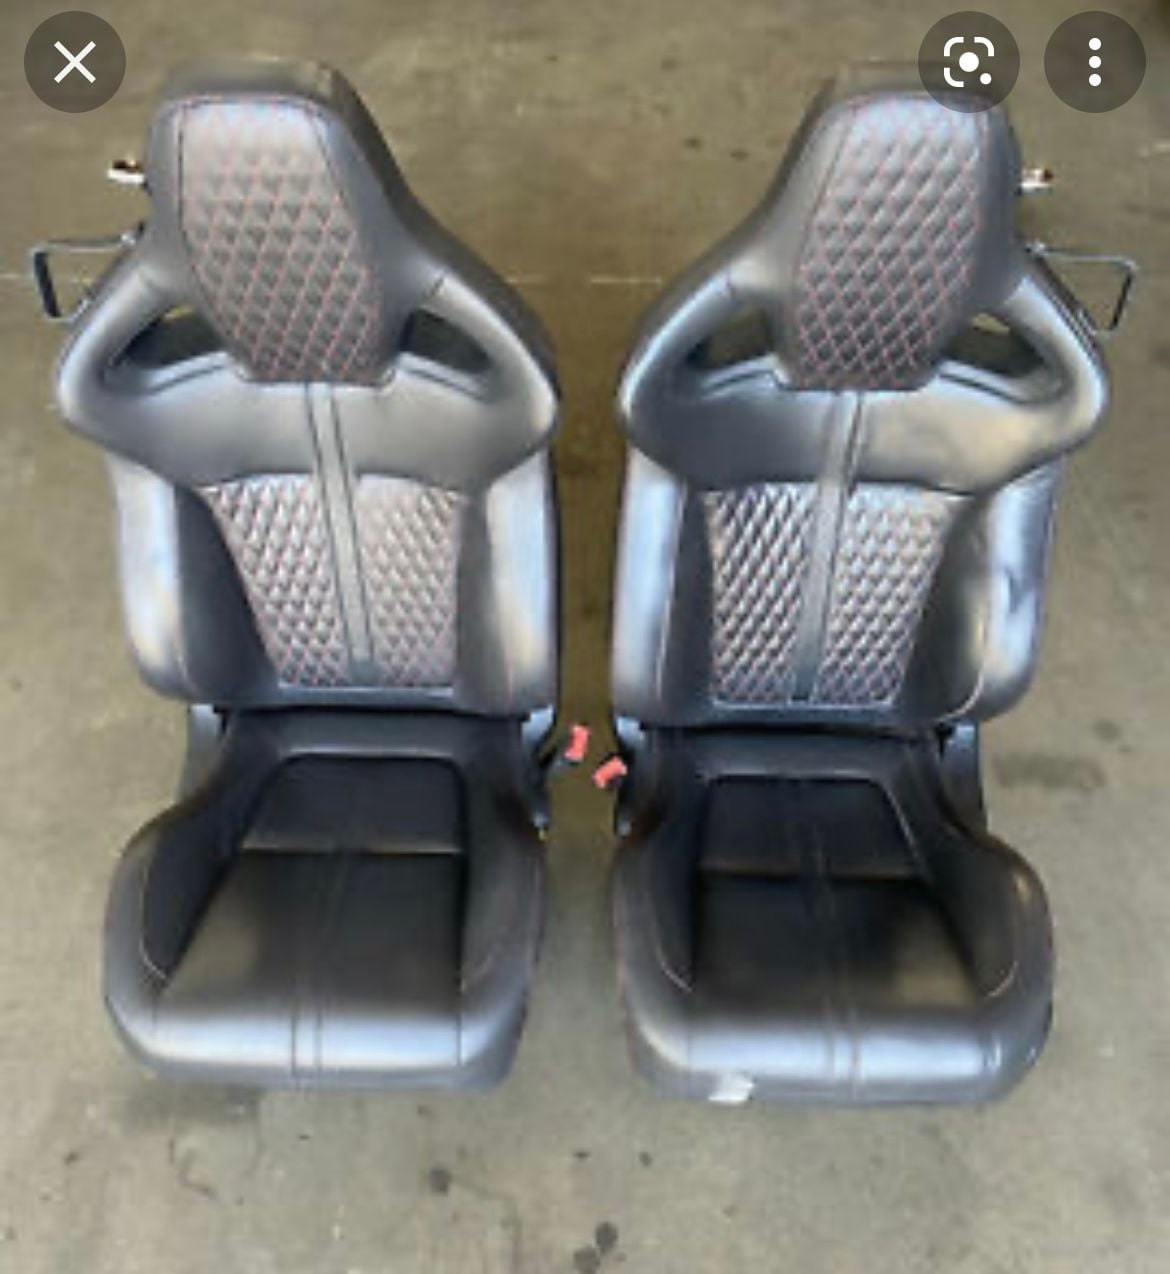 Interior/Upholstery - Wanted: 07-15 XK drivers recaro seat or airbag - New or Used - 0  All Models - Las Vegas, NV 89117, United States